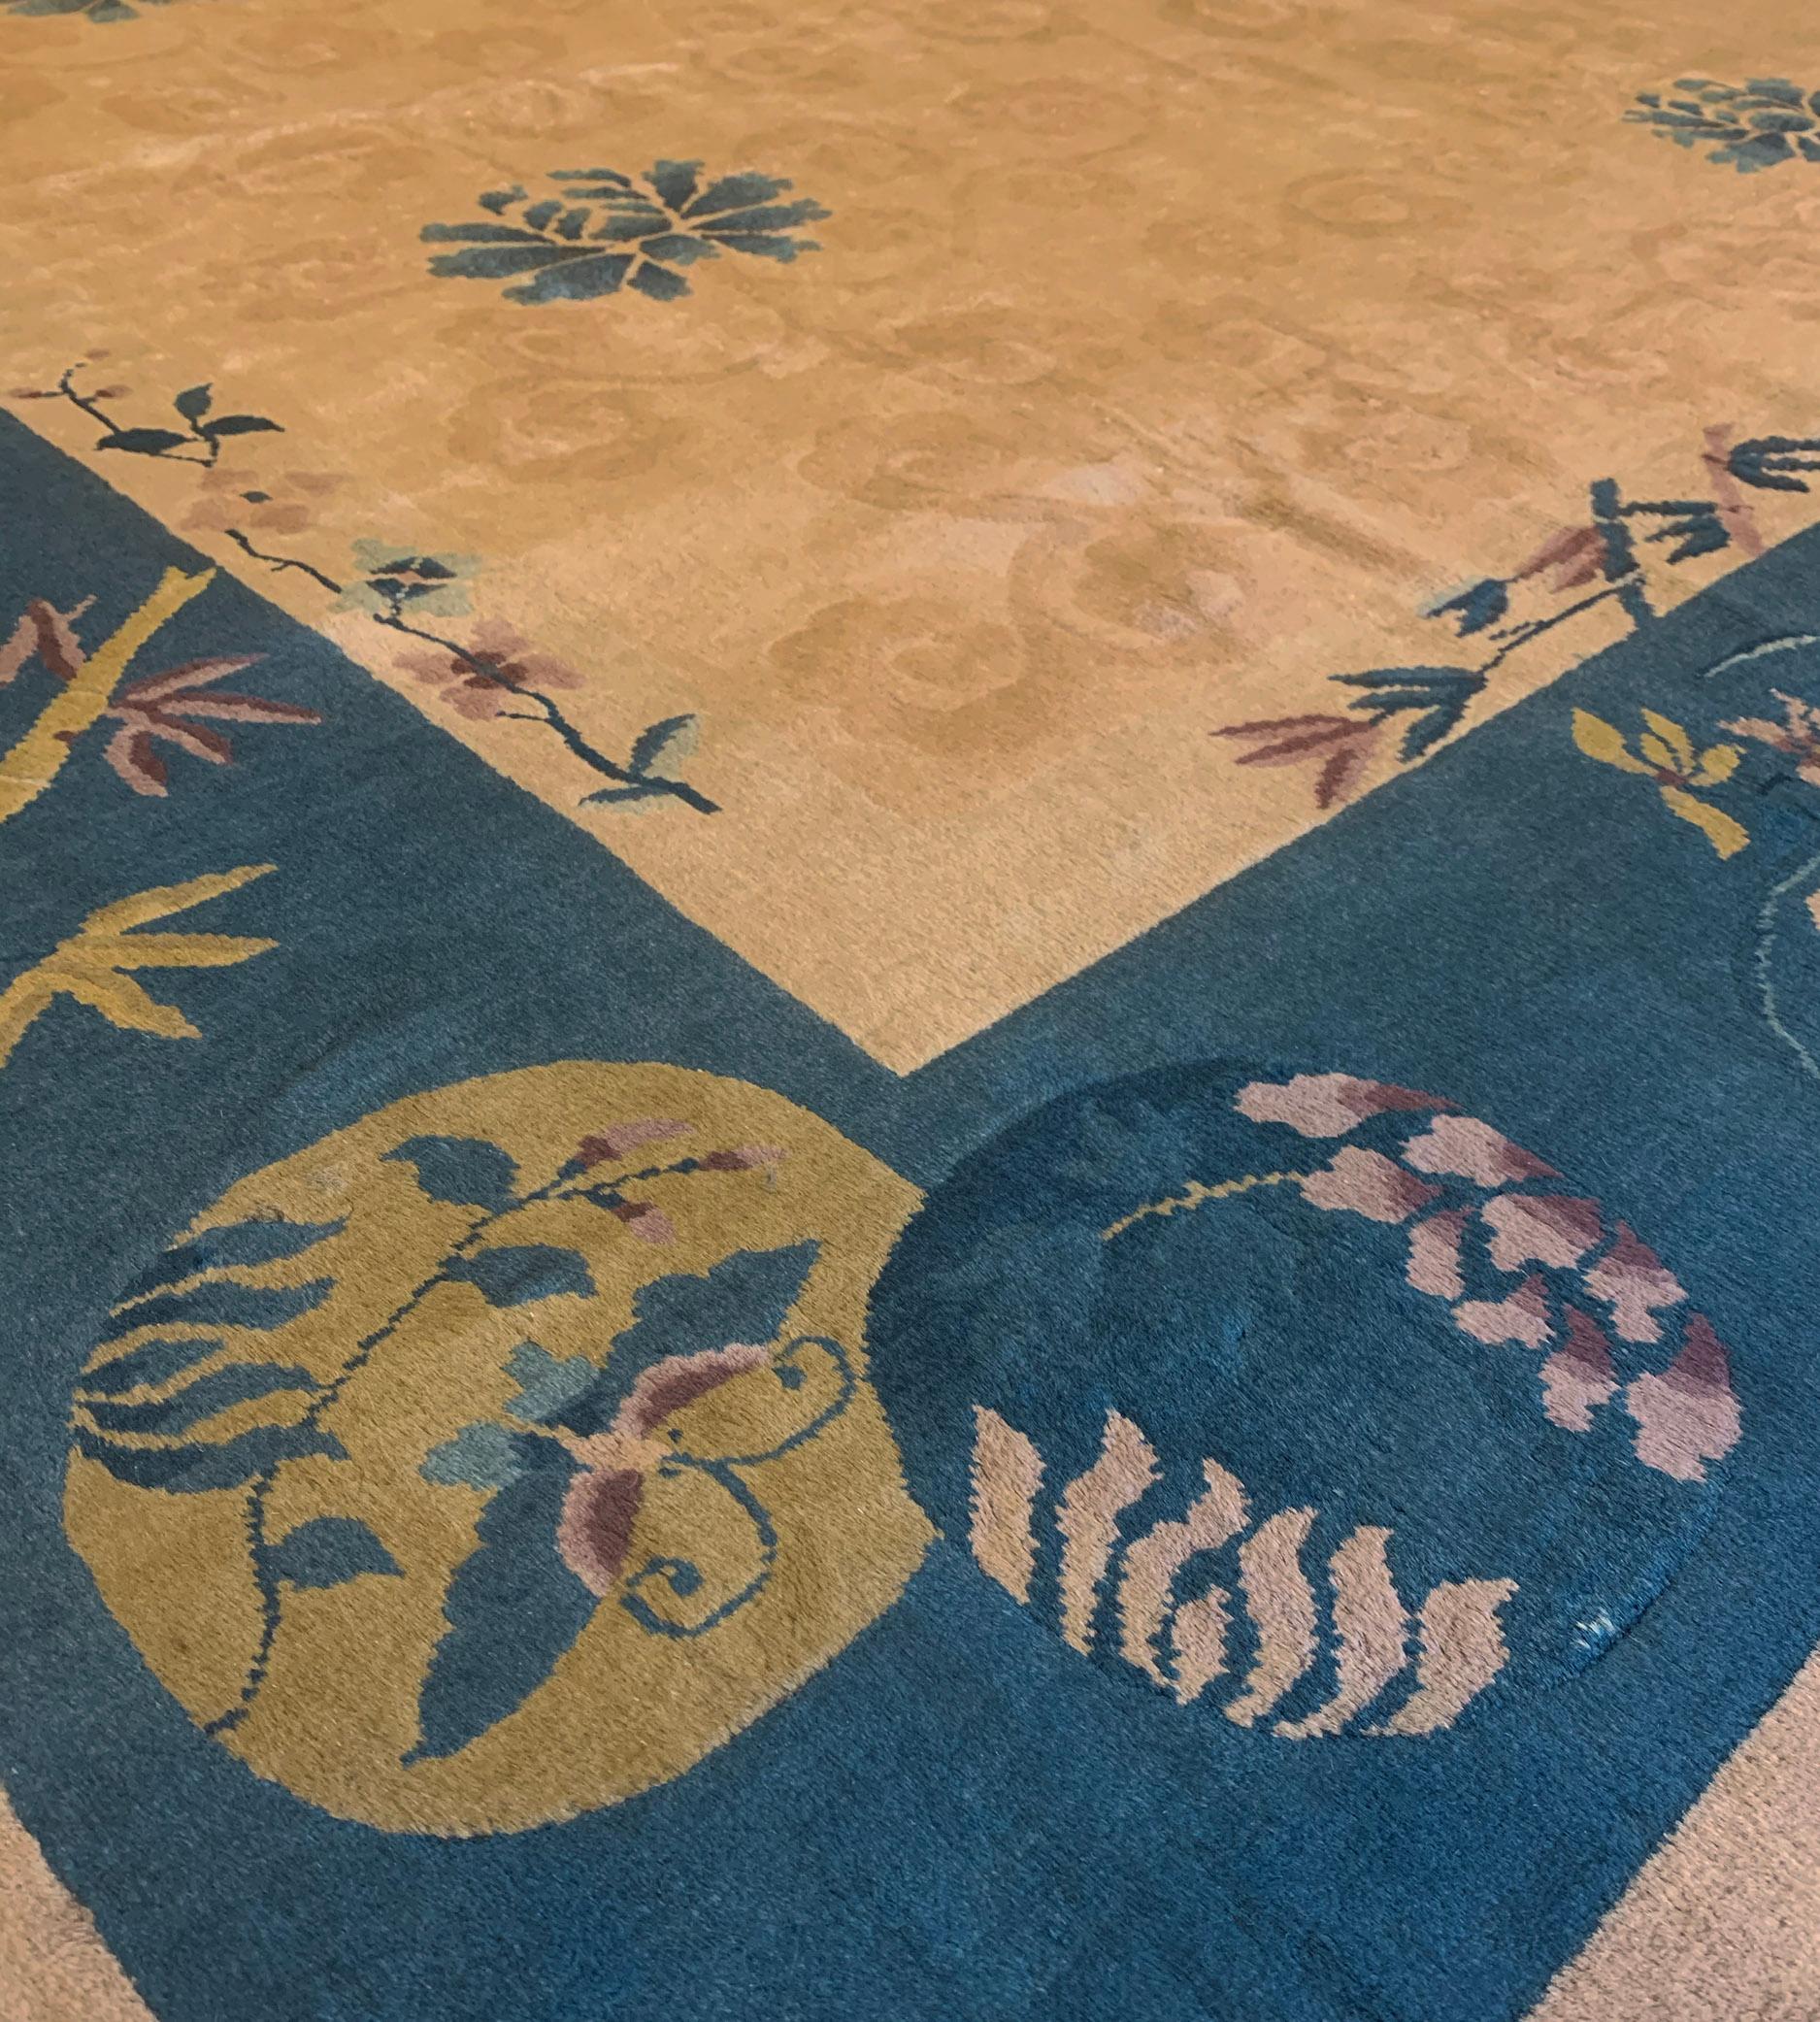 This traditional handwoven Chinese rug has a refined beige field with diagonal rows of stylized lotus flowers issuing muted meandering curling vines, in a midnight blue border or sparse bouquets, flowering vases and geometric butterfly and cloud